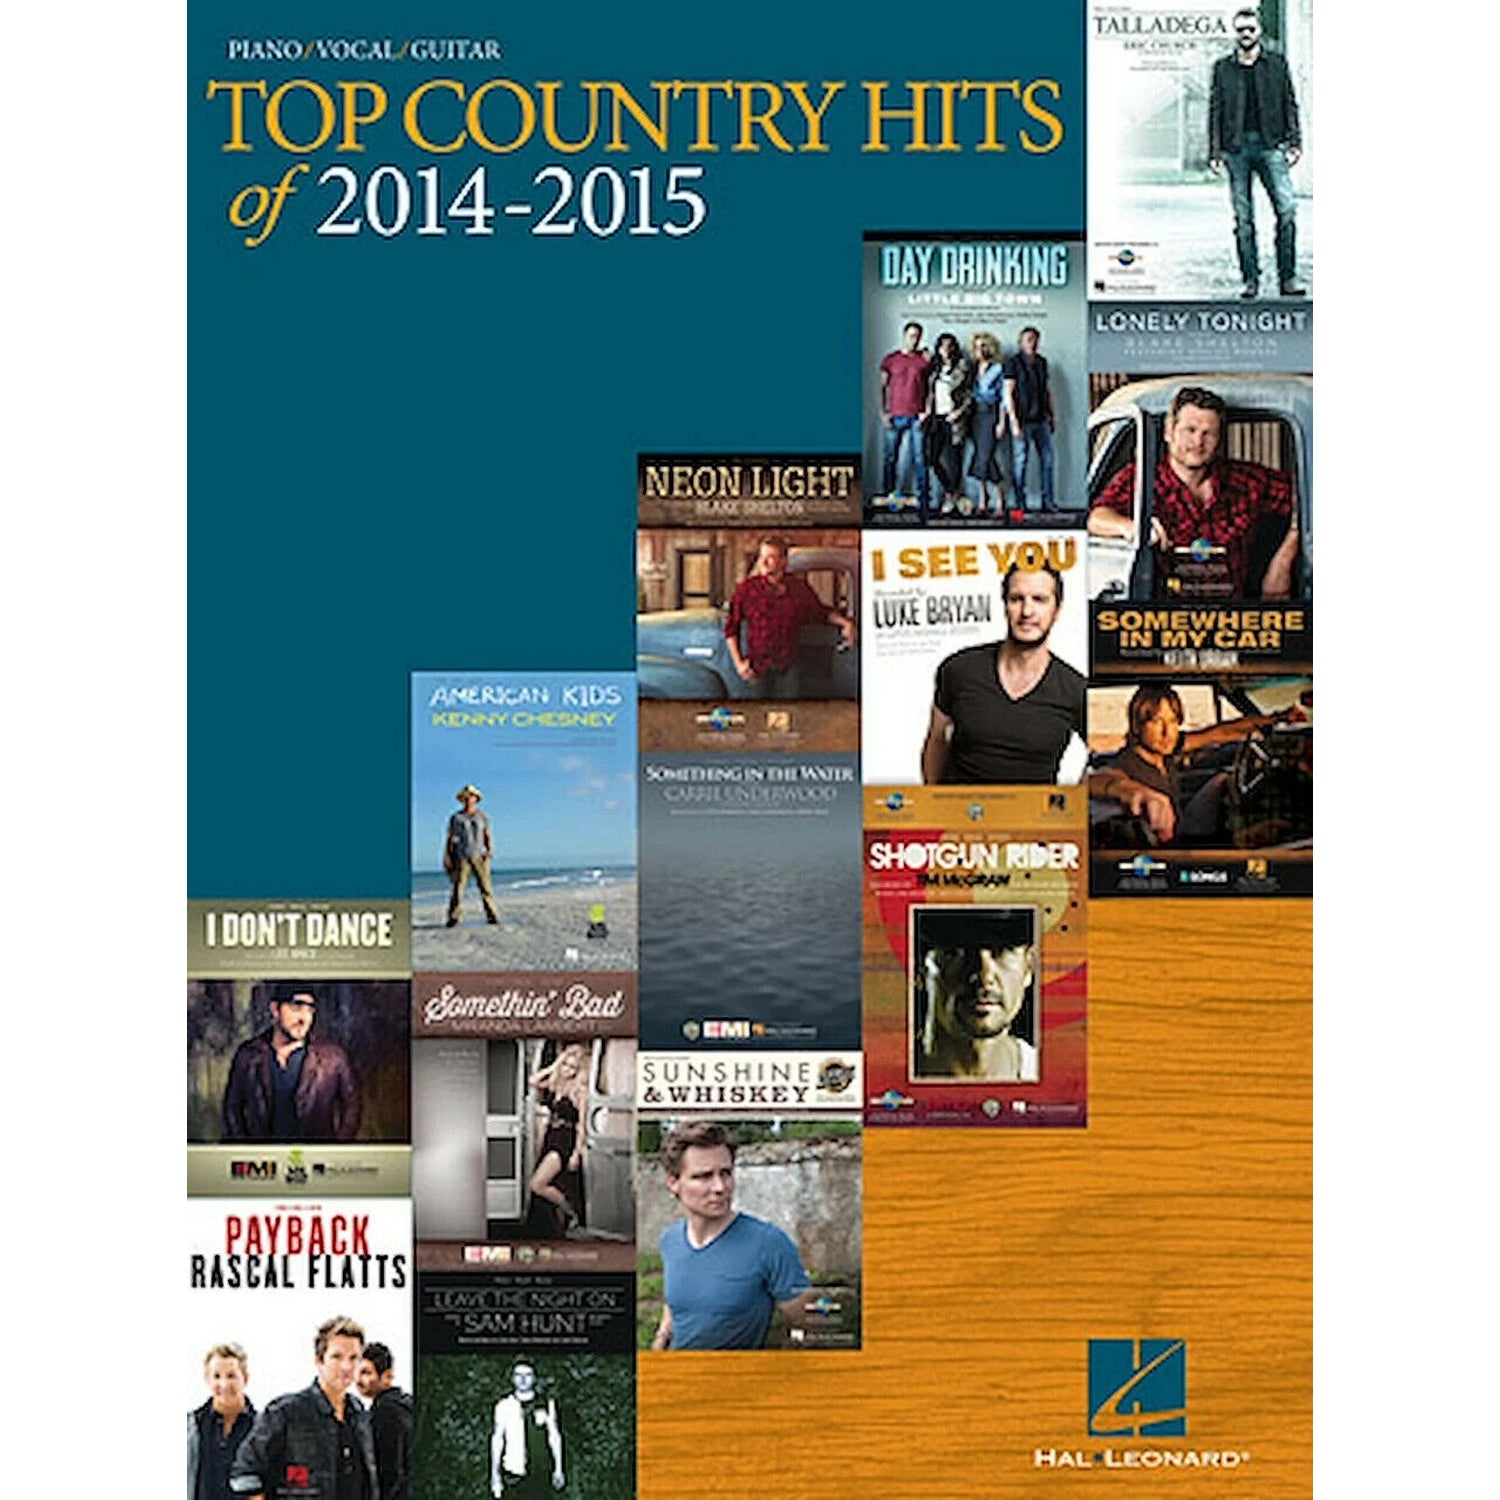 Top Country Hits 2014-2015